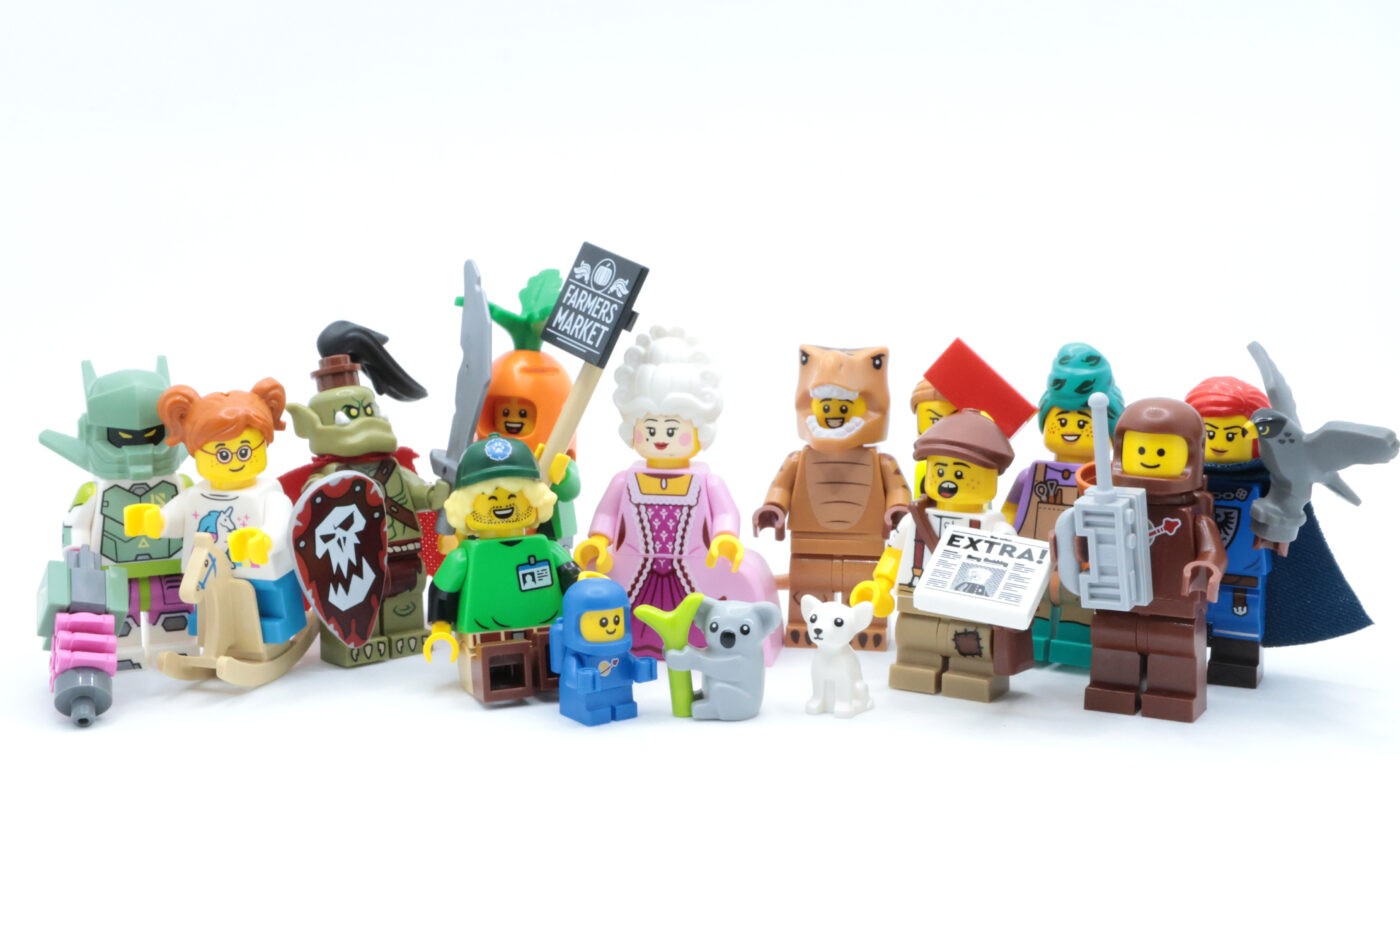 2013 LEGO Minifigures Series 9 Heroic Knight Review - Bricks and Bloks